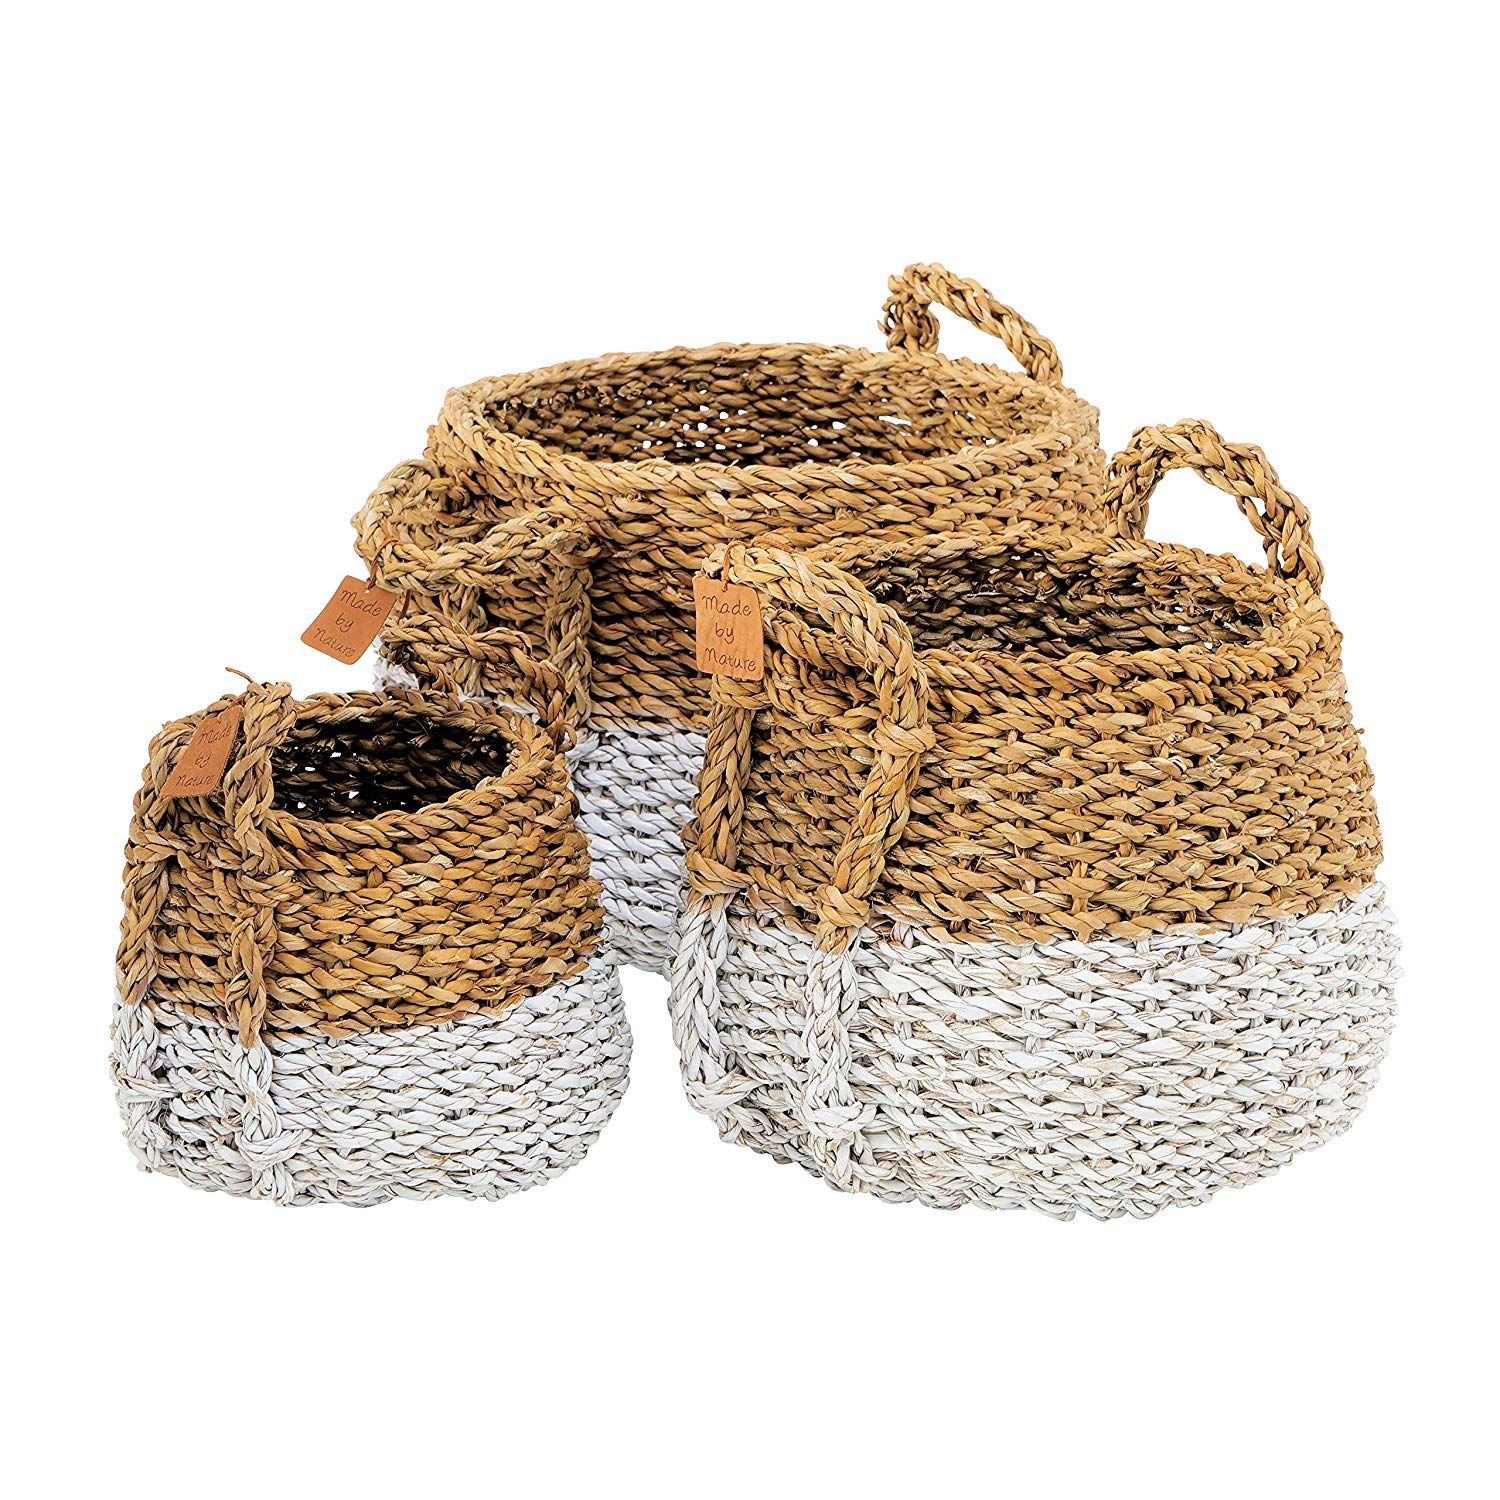 Two-toned Handwoven Belly Baskets, Set of 3, White Bottom Accents, Chunky Weave, Natural, 17.75, ... | Walmart (US)